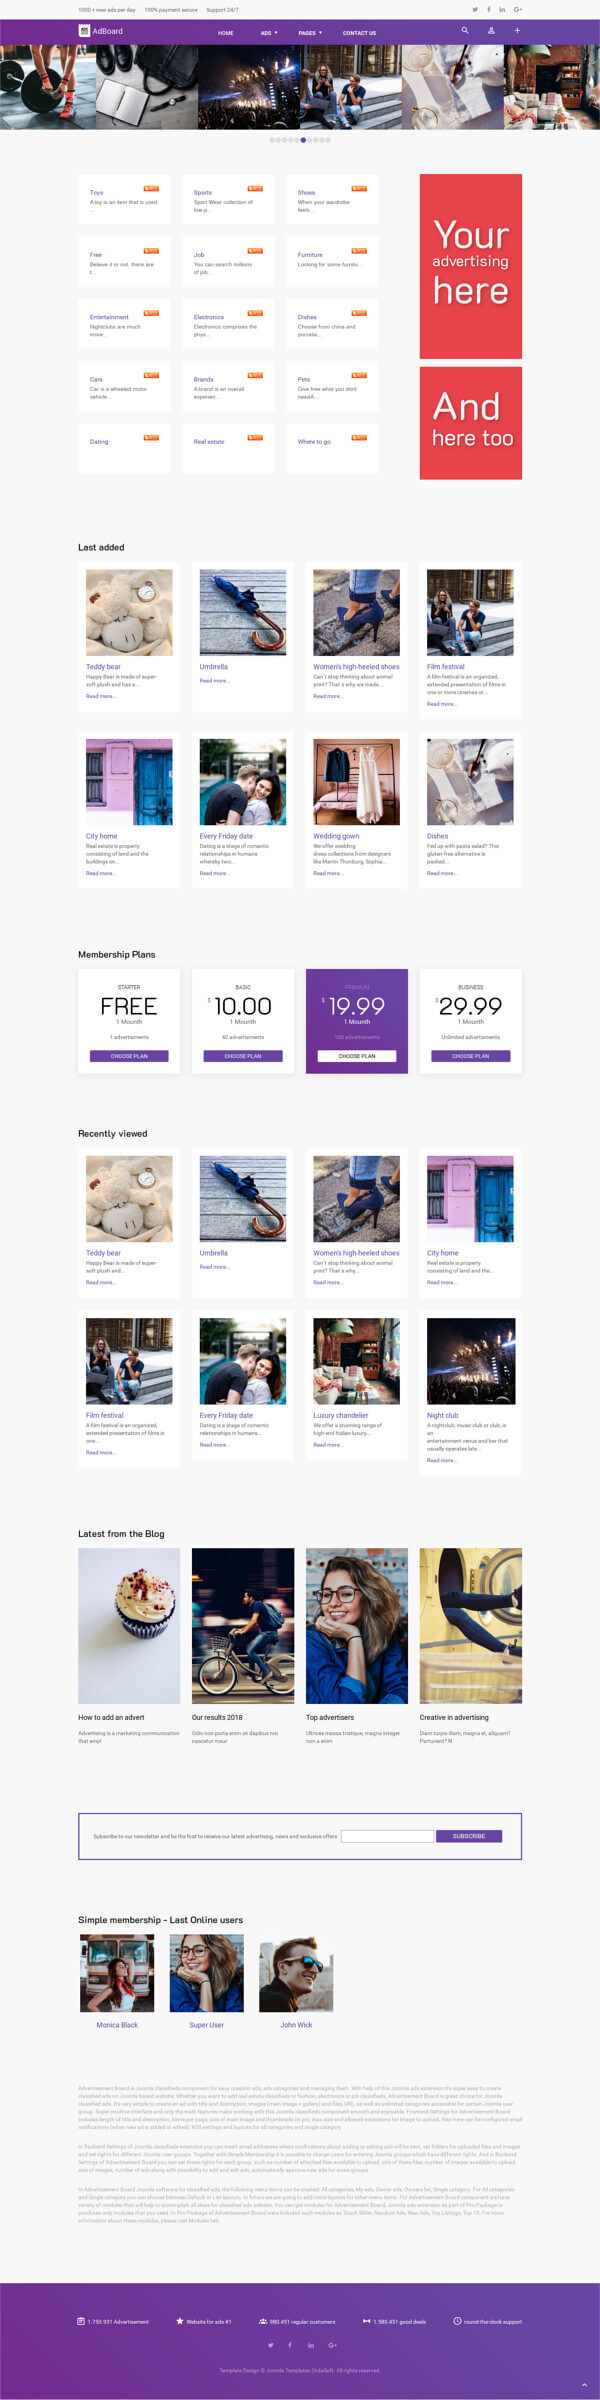 Rating System - Joomla business template, full screen